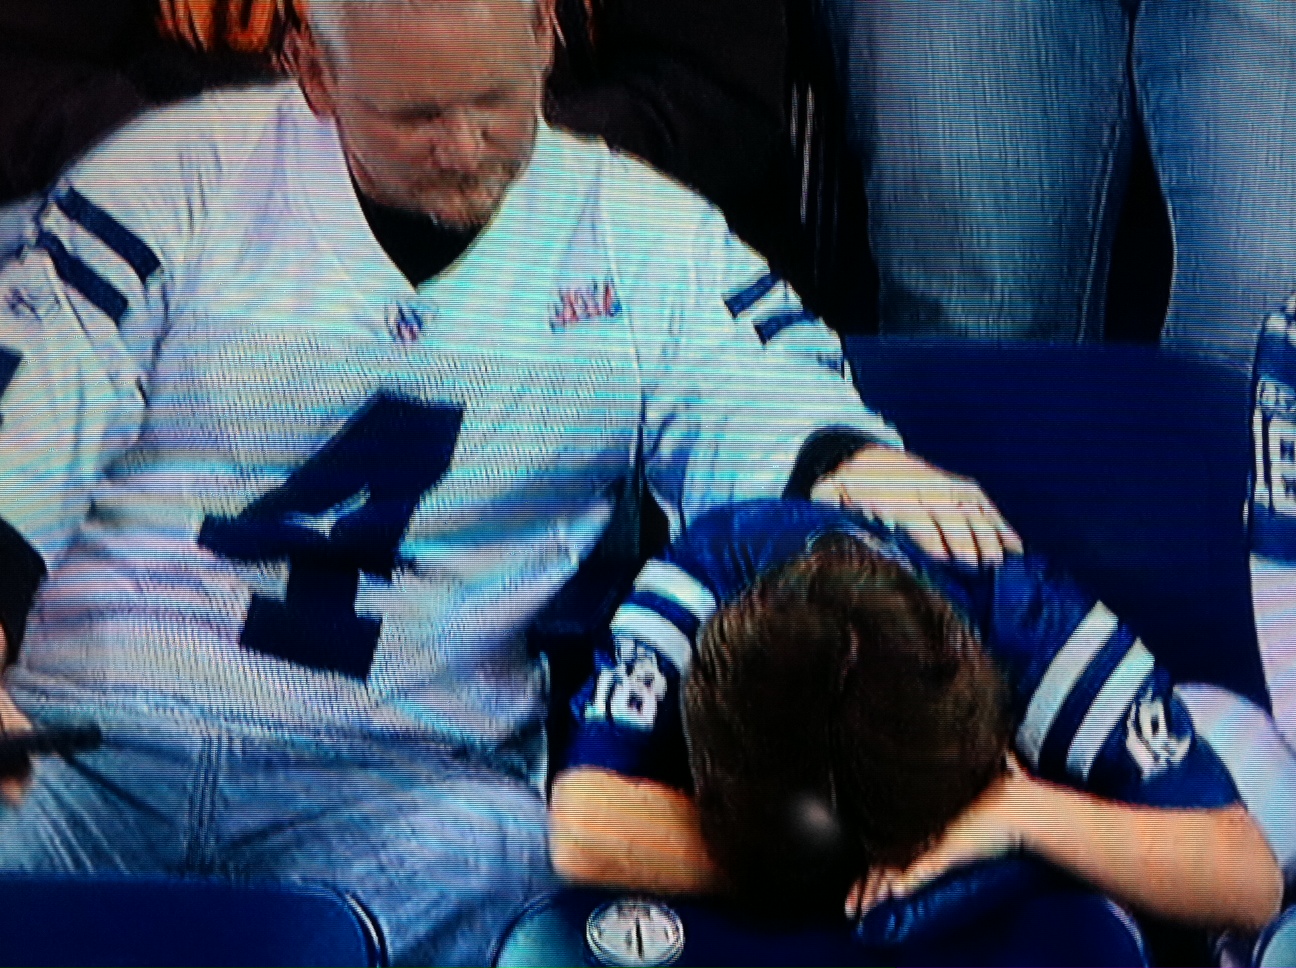 Colts-fan-crying-at-game.jpg